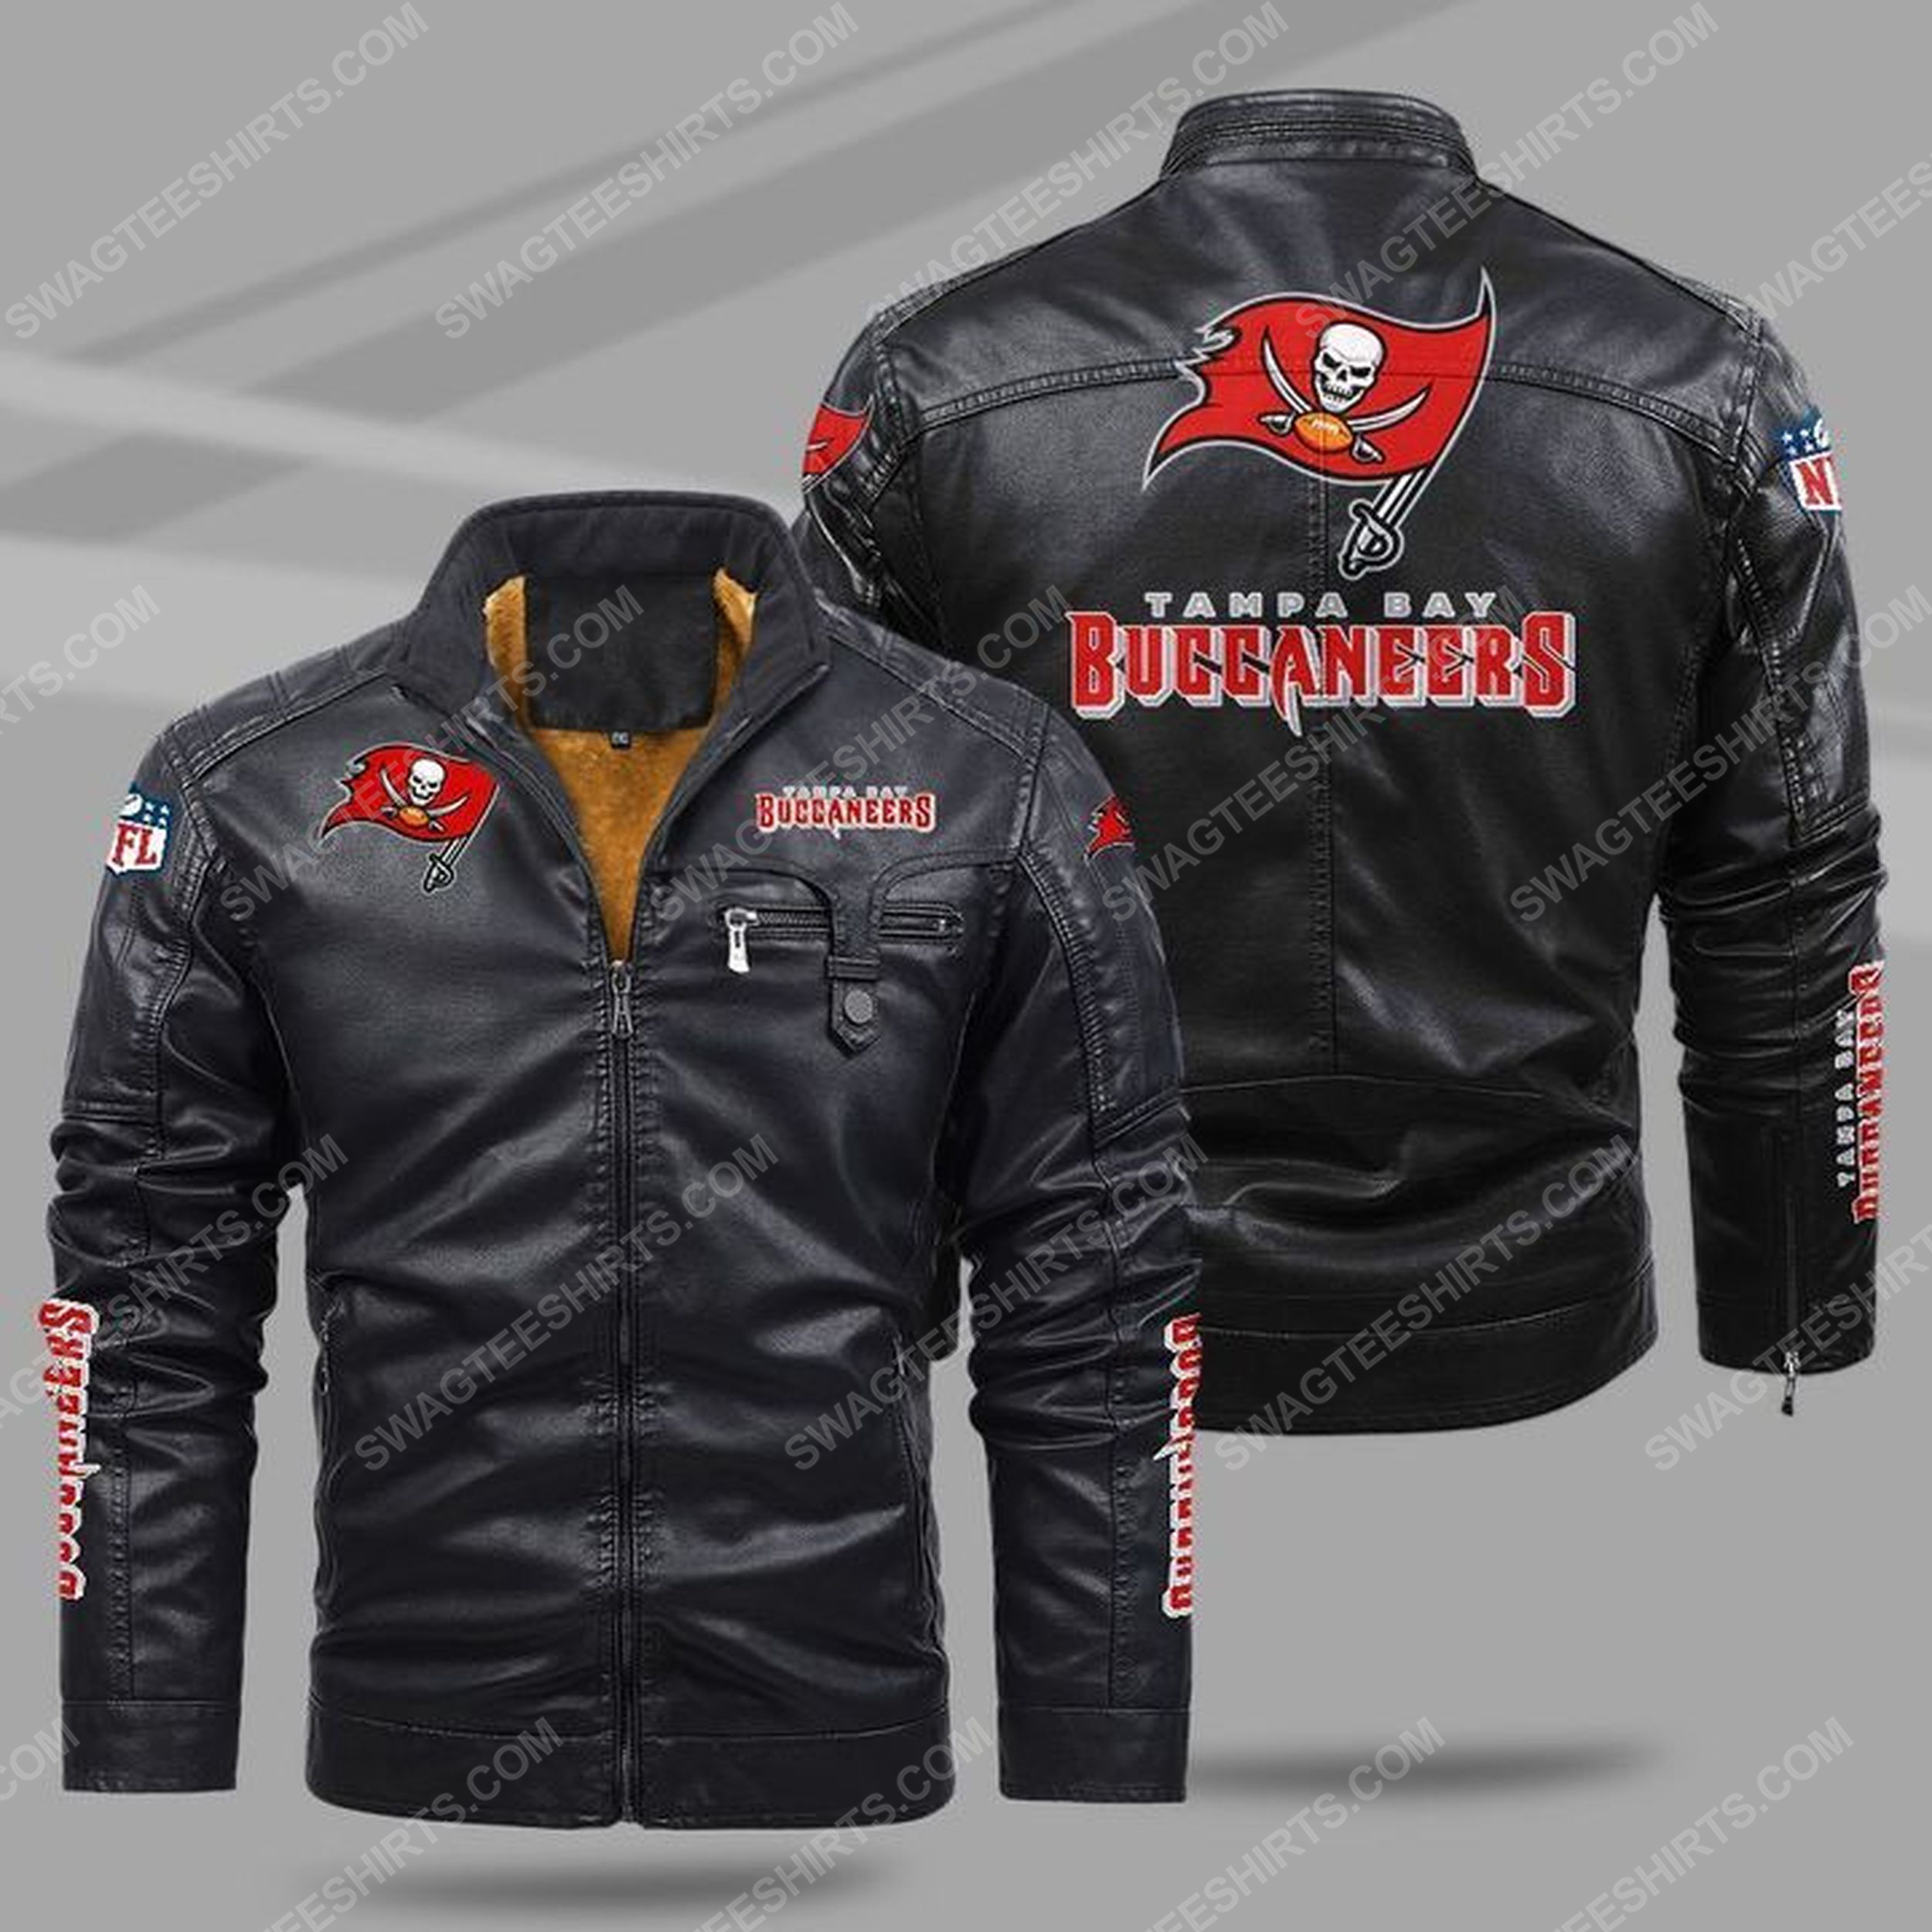 The tampa bay buccaneers nfl all over print fleece leather jacket - black 1 - Copy